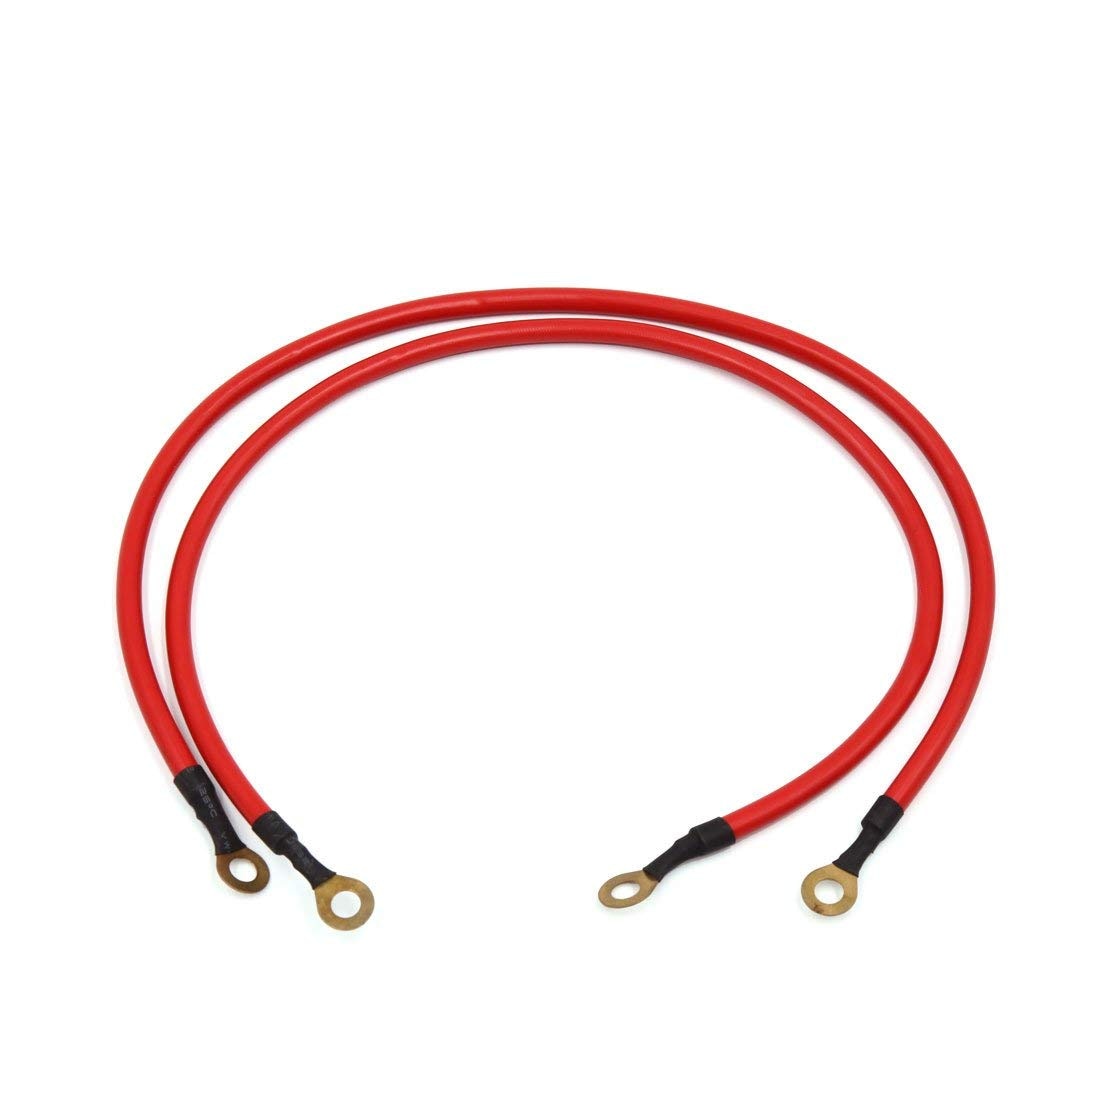 X Autohaux 27cm 42cm 45cm DC 12V 24V Red Car Battery Ground Wire Electric Conduction Stable Voltage Cable Transfer Cable